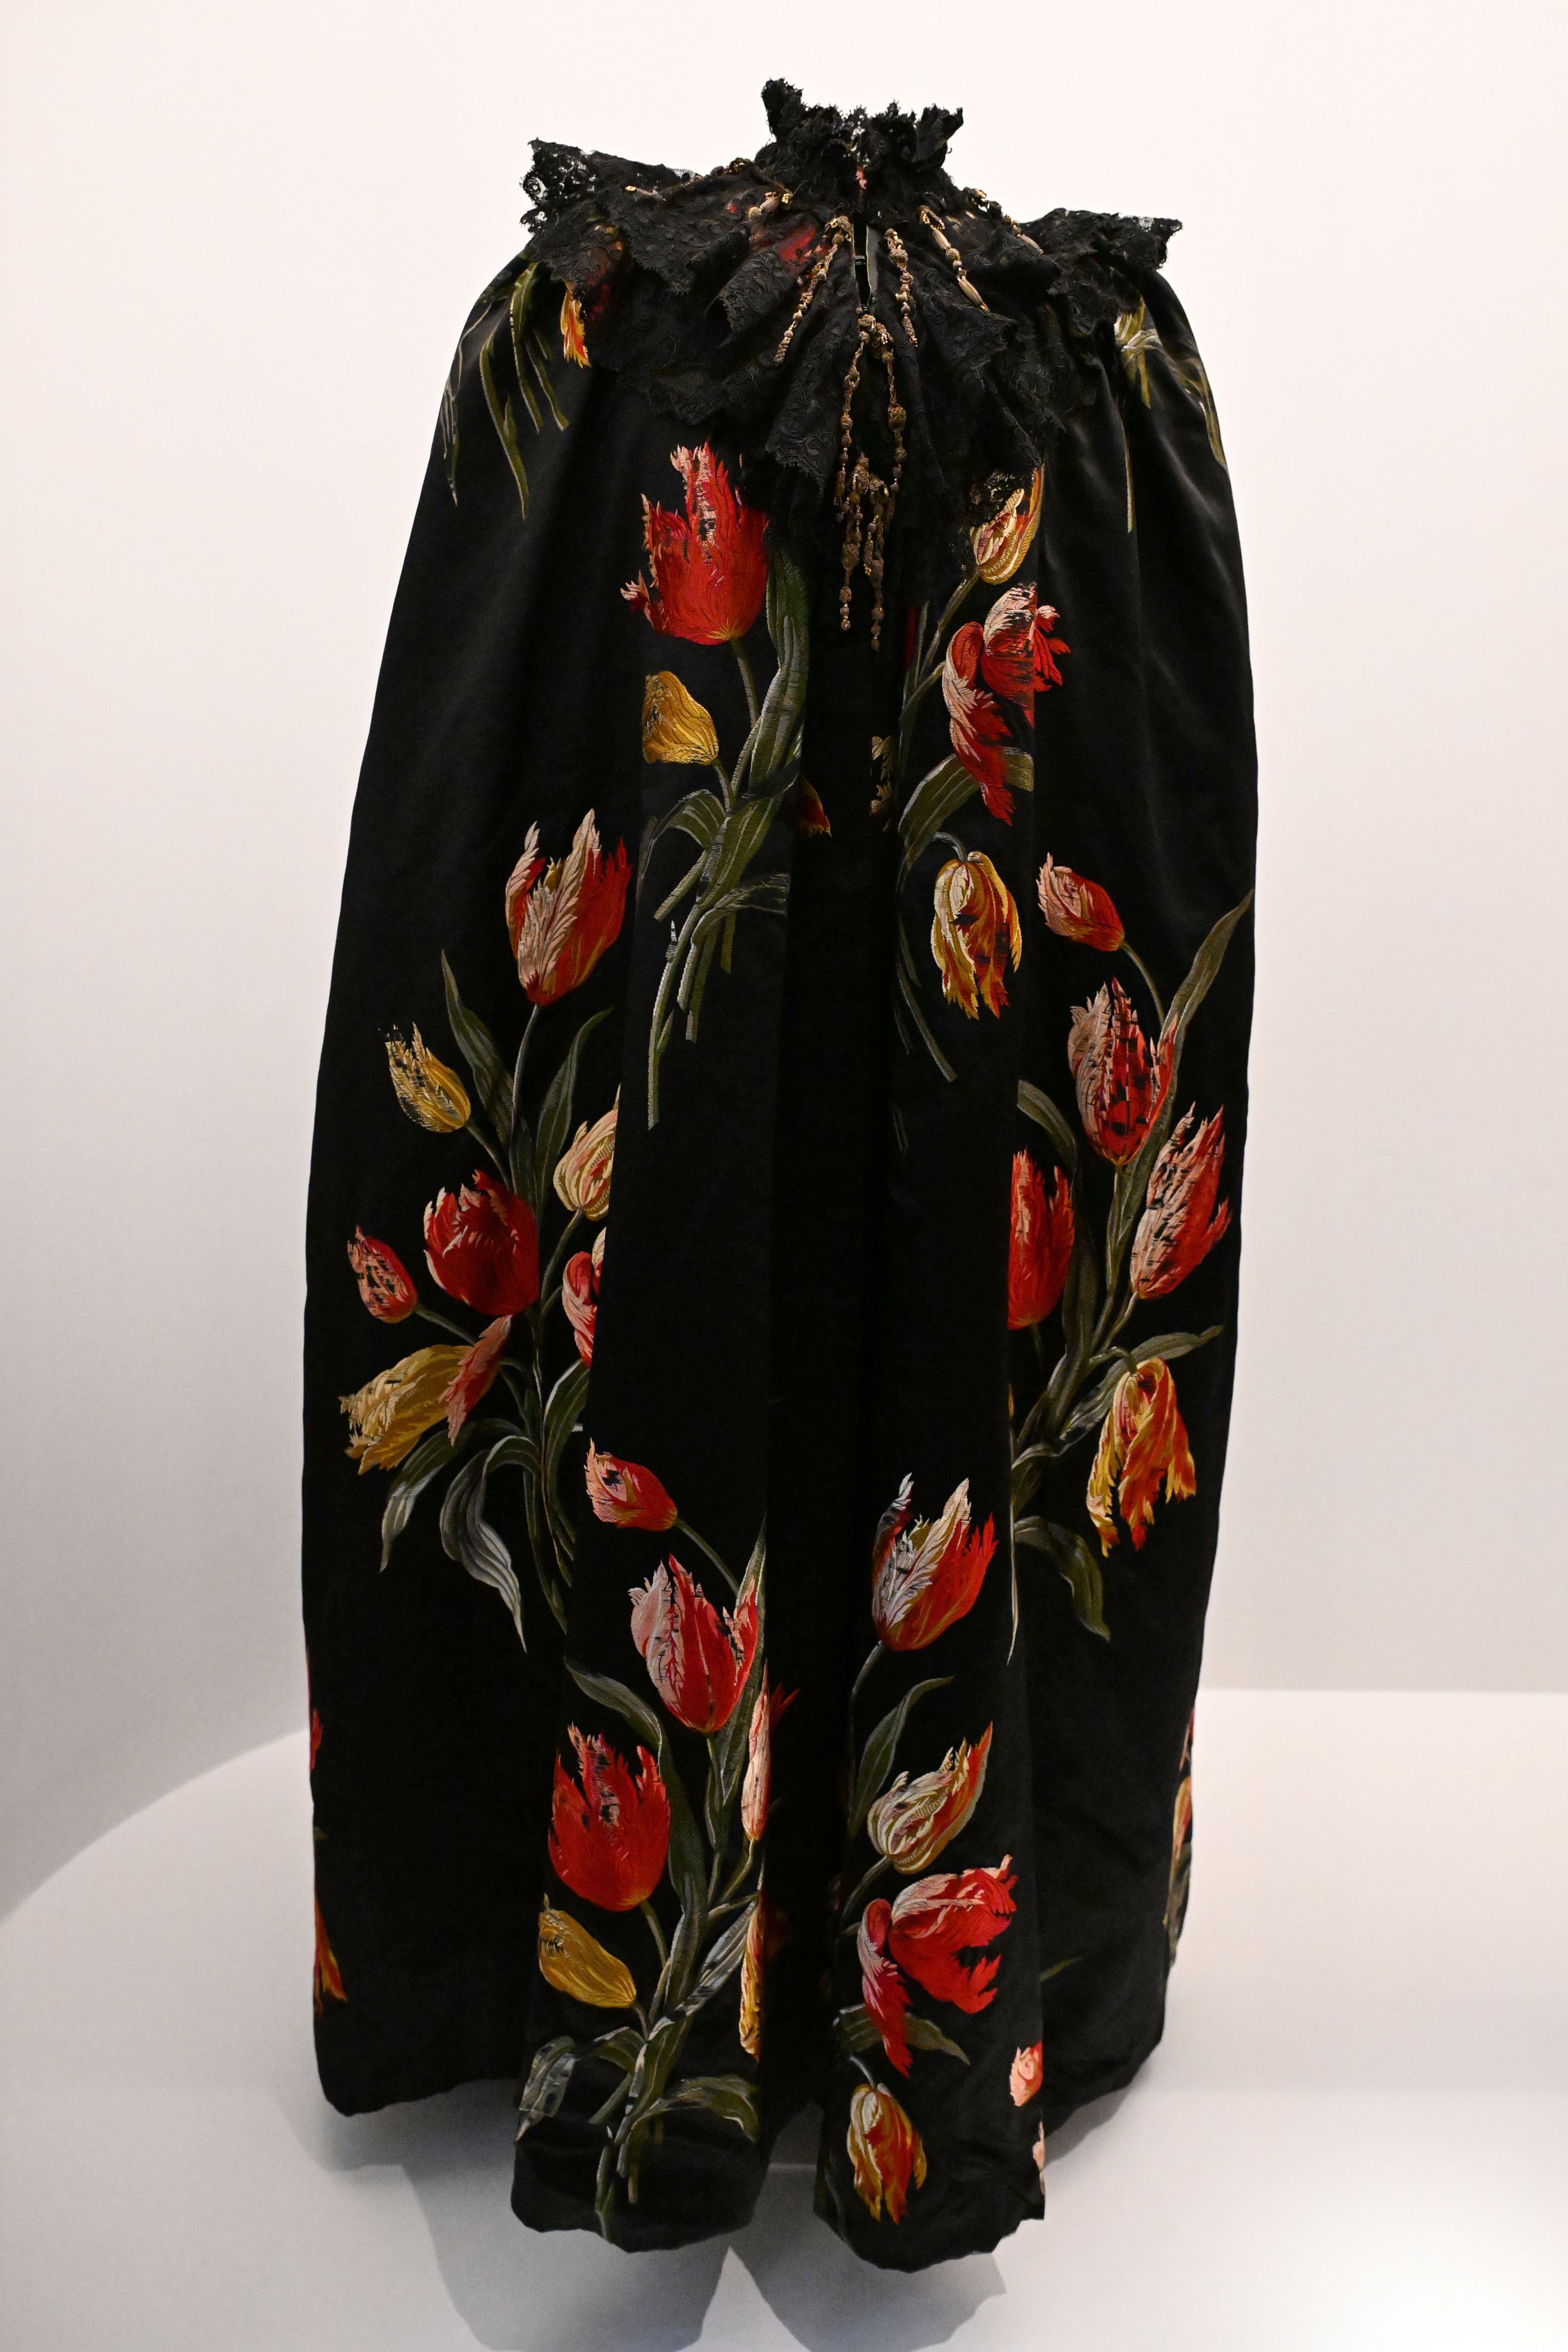 Black skirt with floral pattern on display, intricate lace at waist. No persons visible